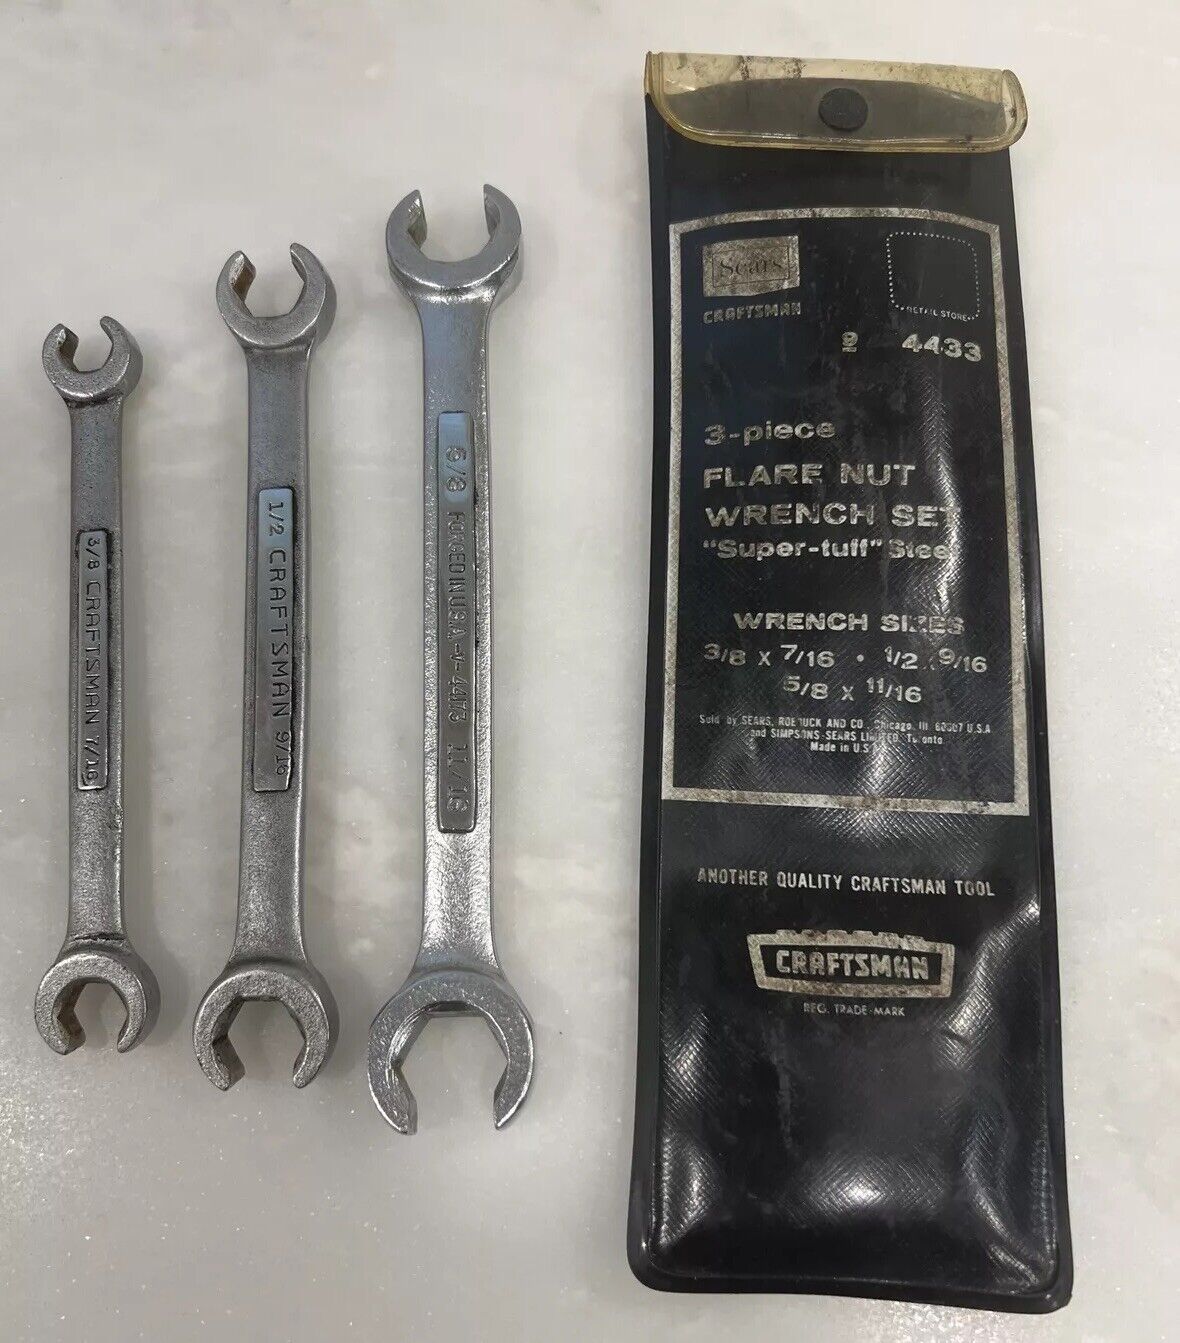 SEARS Craftsman V Series Flare Nut Wrench 3pc Set & Pouch 9-4433 Vintage Quality